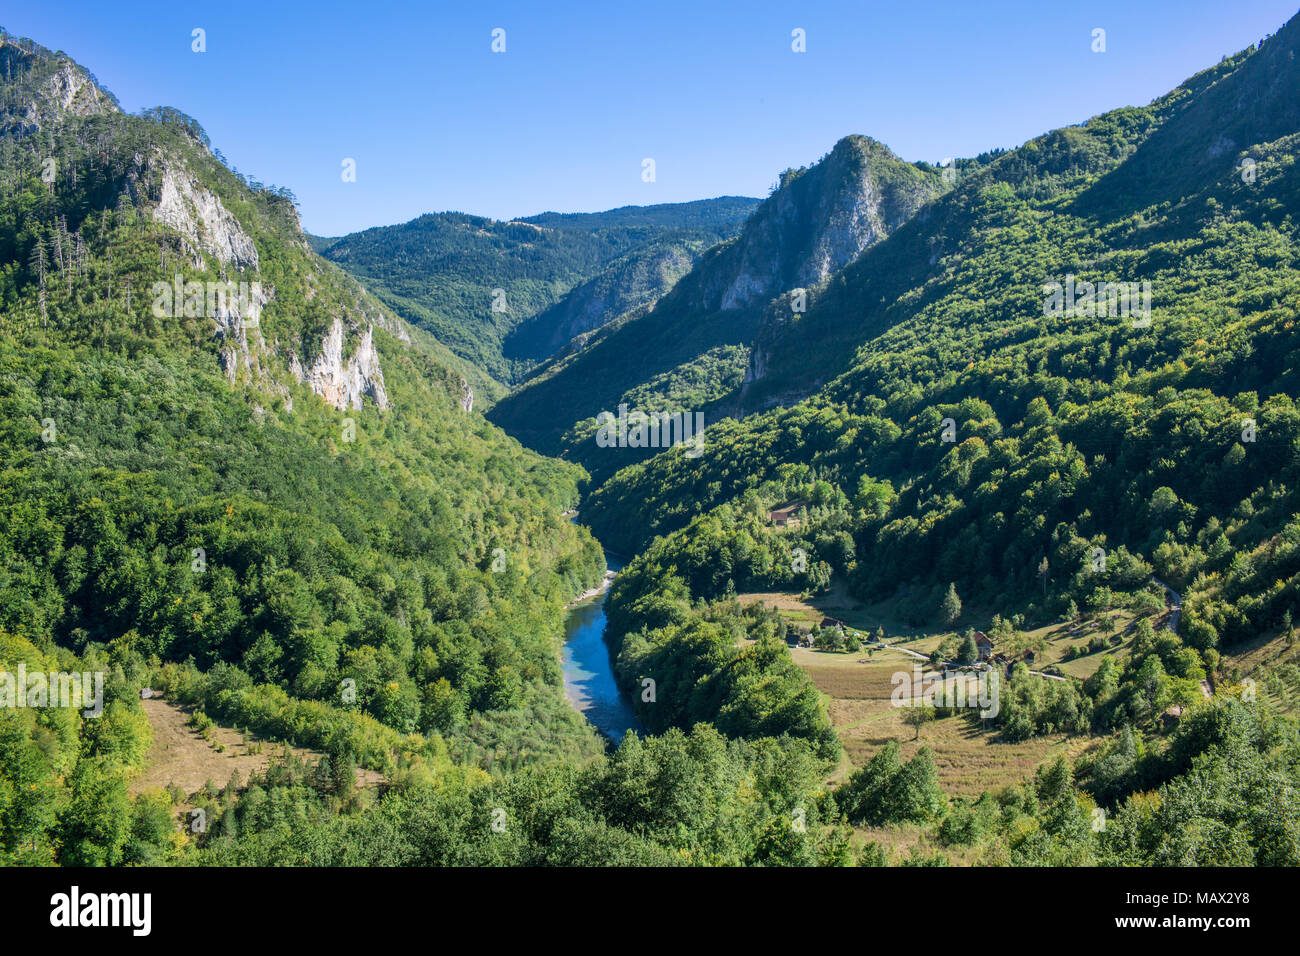 Beautiful View Over The Green Mountains And Tara River Canyon In Montenegro with Amazing nature in Eastern Europe Stock Photo